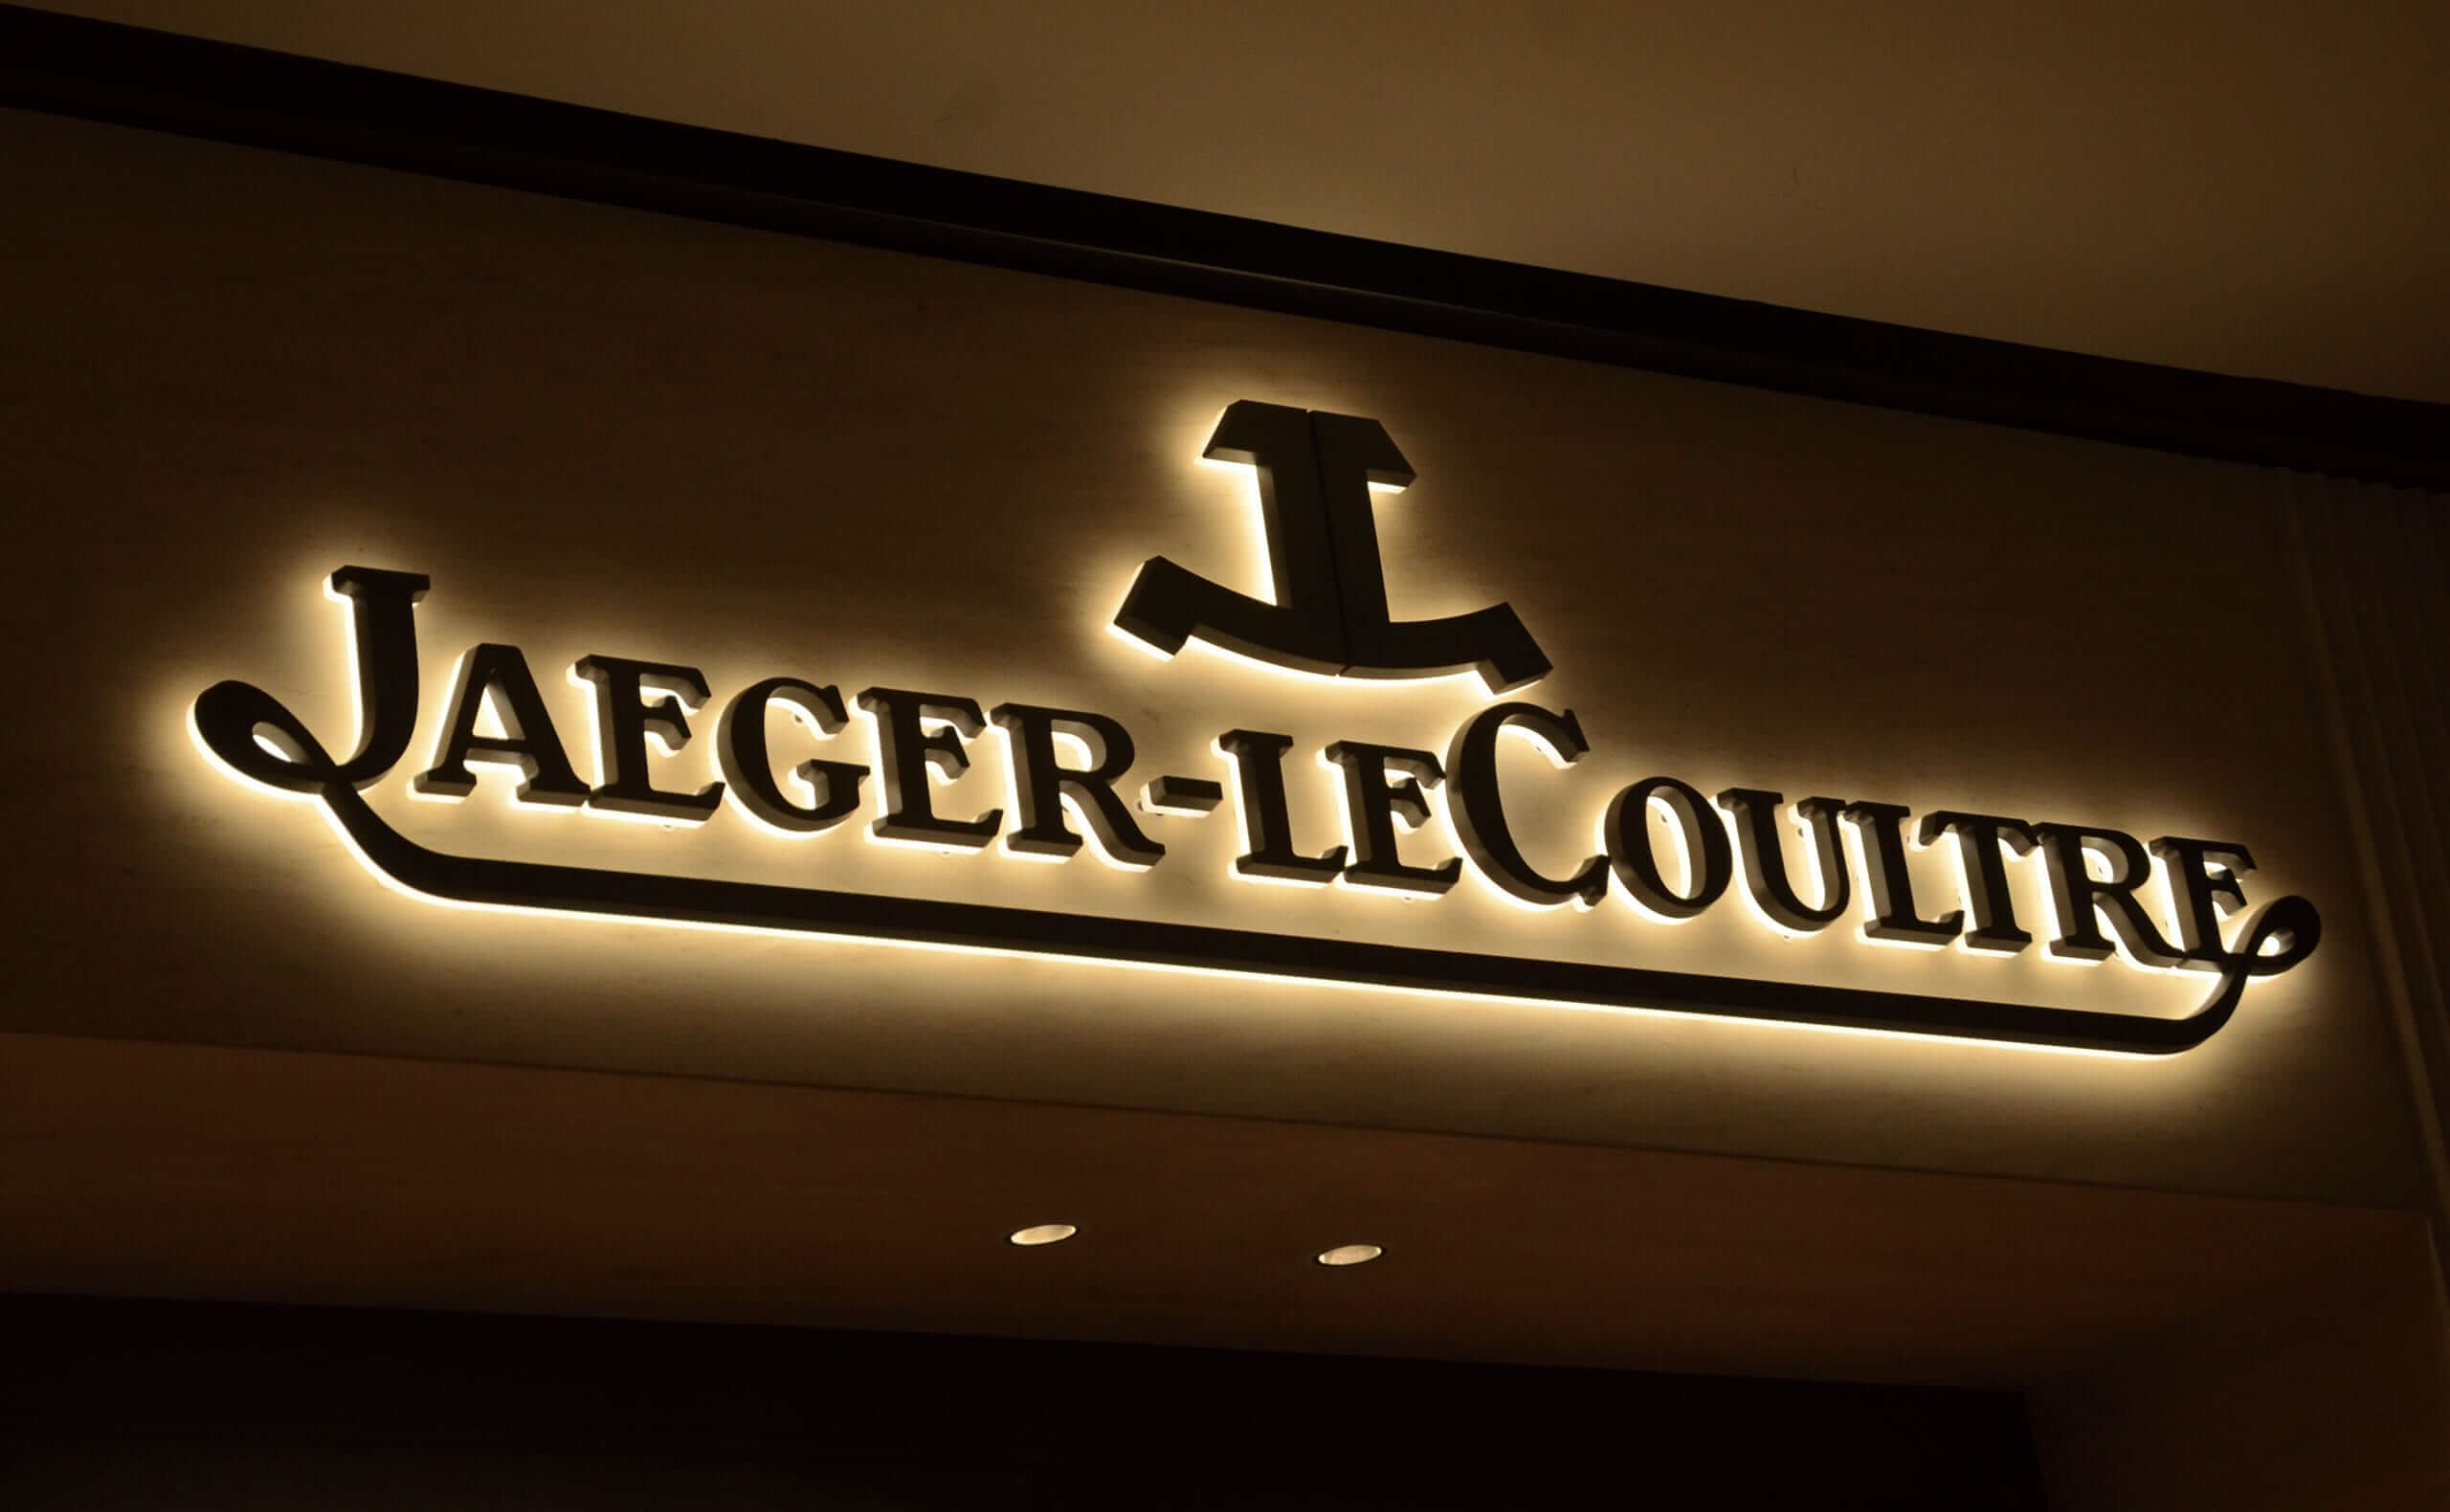 Acrylic Backlit Channel Letters For Jaeger-LeCoultre